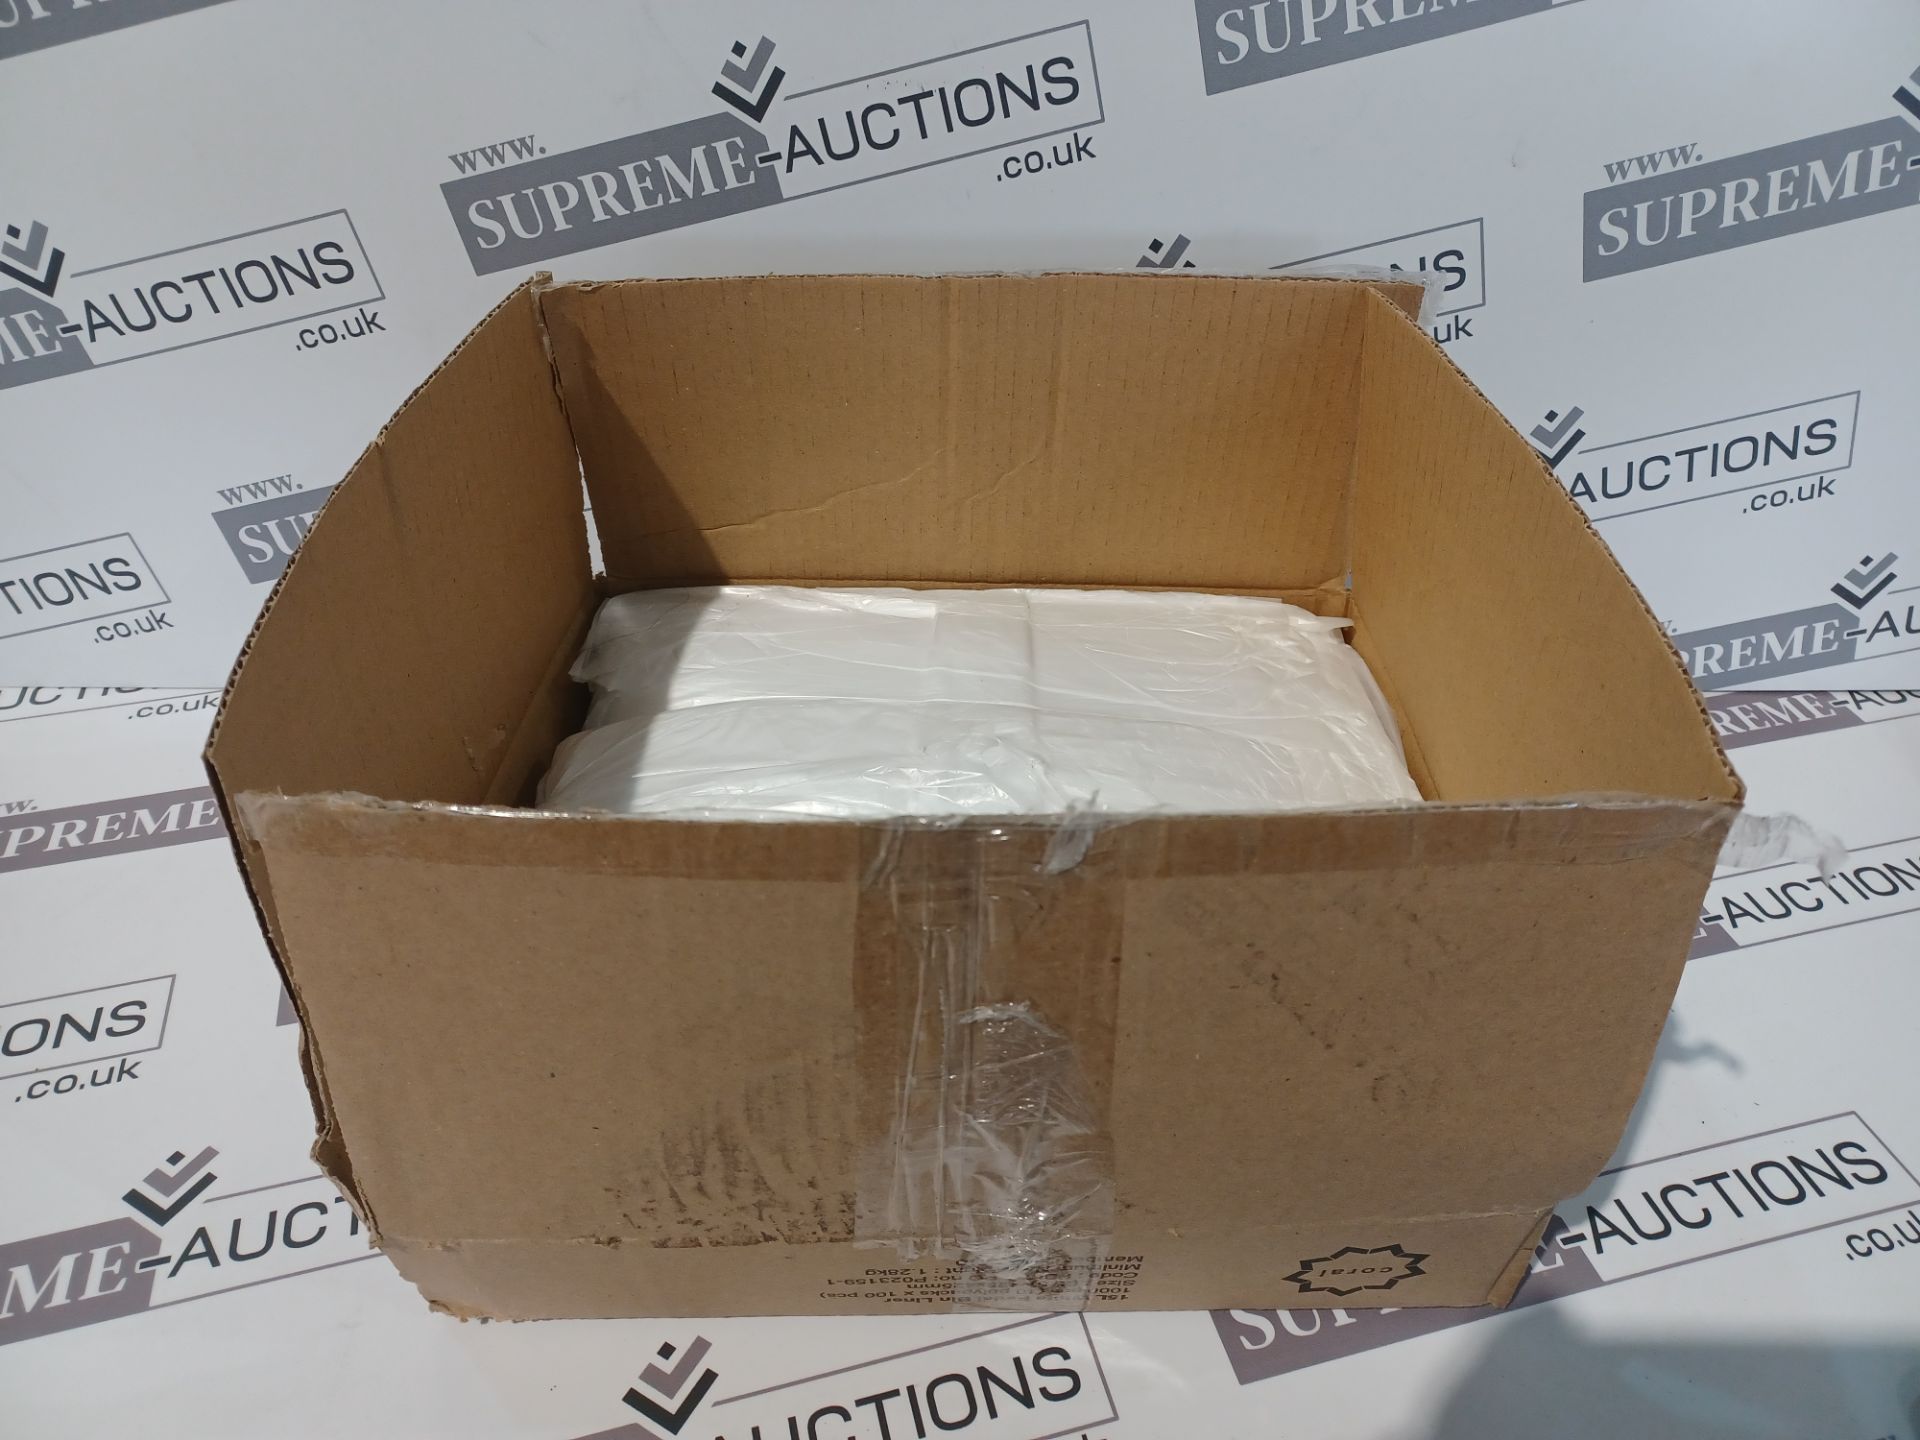 10 X BRAND NEW PACKS OF 1000 15L WHITE PEDAL BIN LINERS R15-8